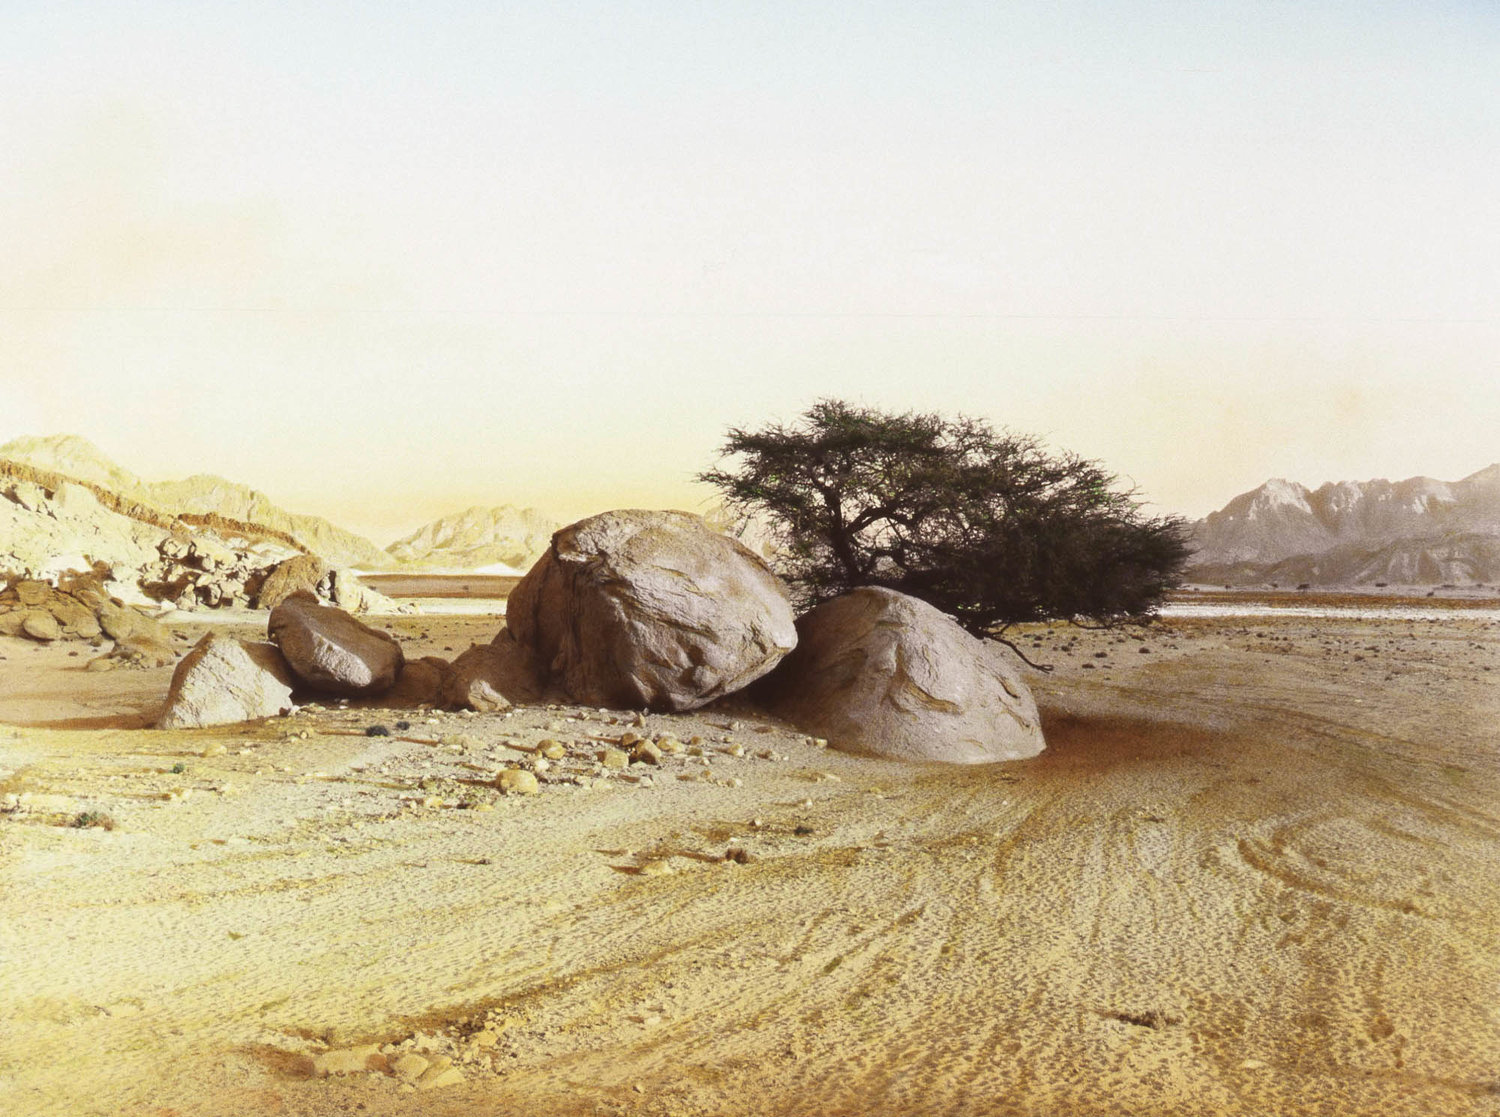 Barry+Iverson,+Two+boulders+and+tree,+Wadi+Masar,+South+Sinai,+1995.jpg